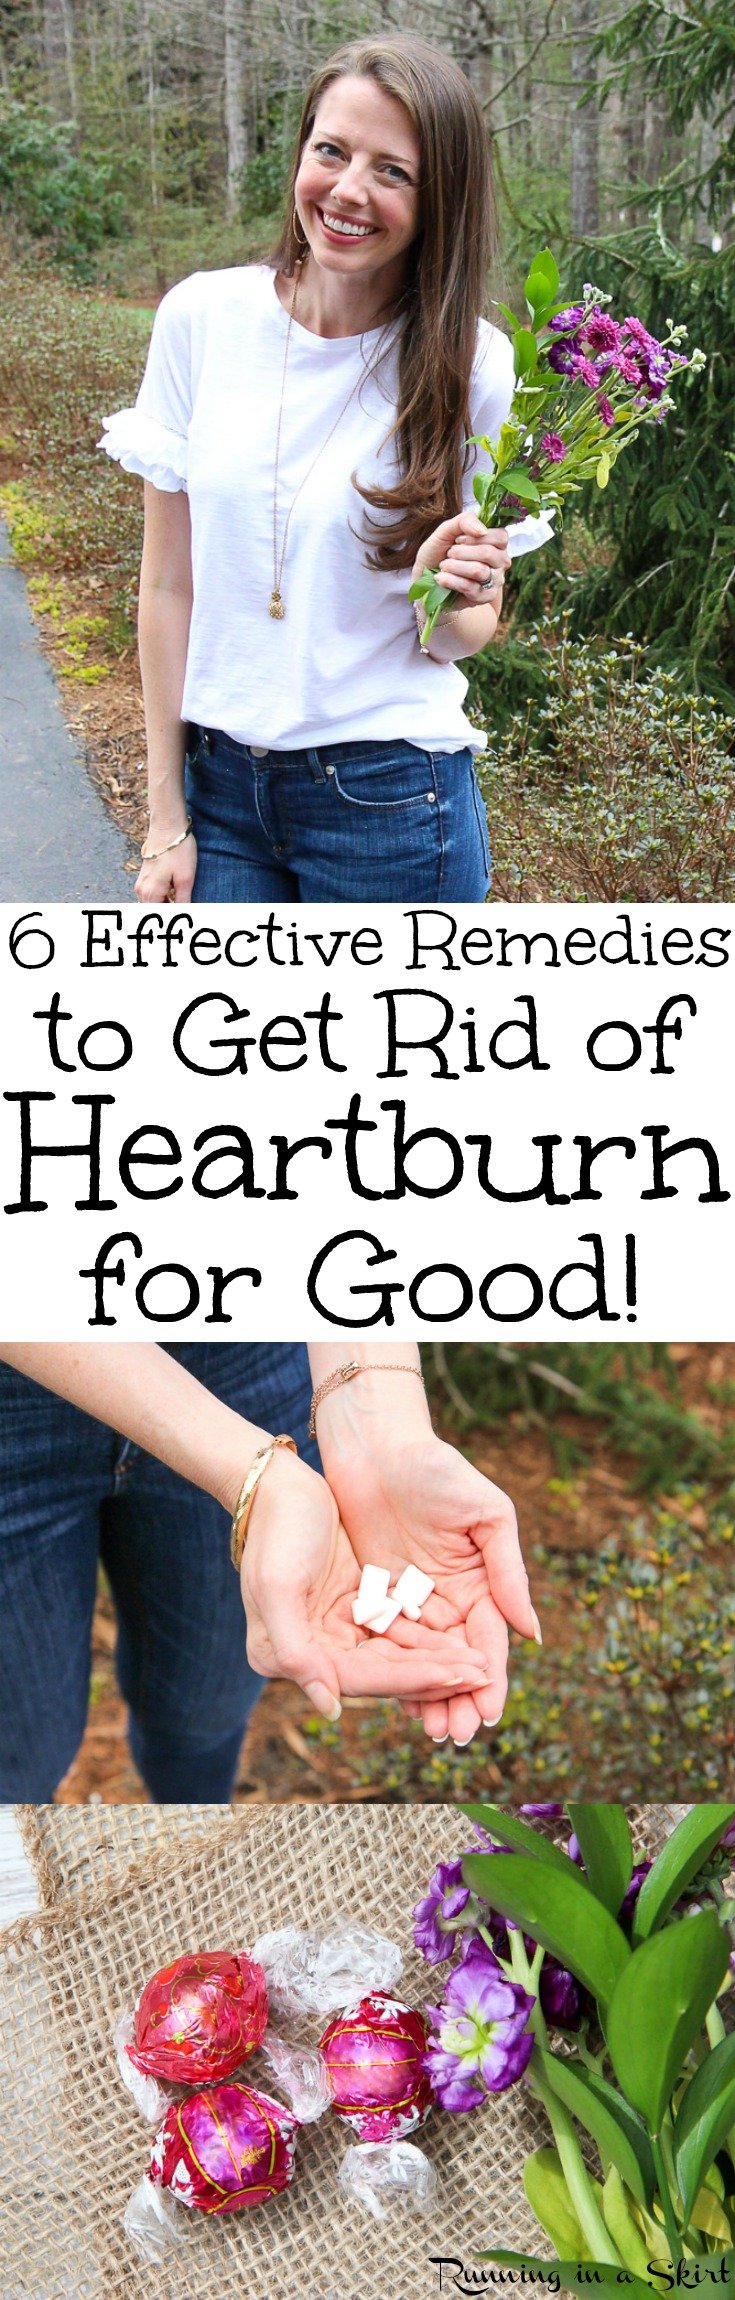 6 Effective Remedies for Heartburn Relief - How to Get Rid of Heartburn Symptoms for Good including triggers, diet ideas, home remedies, and the best medicine and medication to relieve the severe pain in back of your throat and improve your overall health. / Running in a Skirt AD via @juliewunder